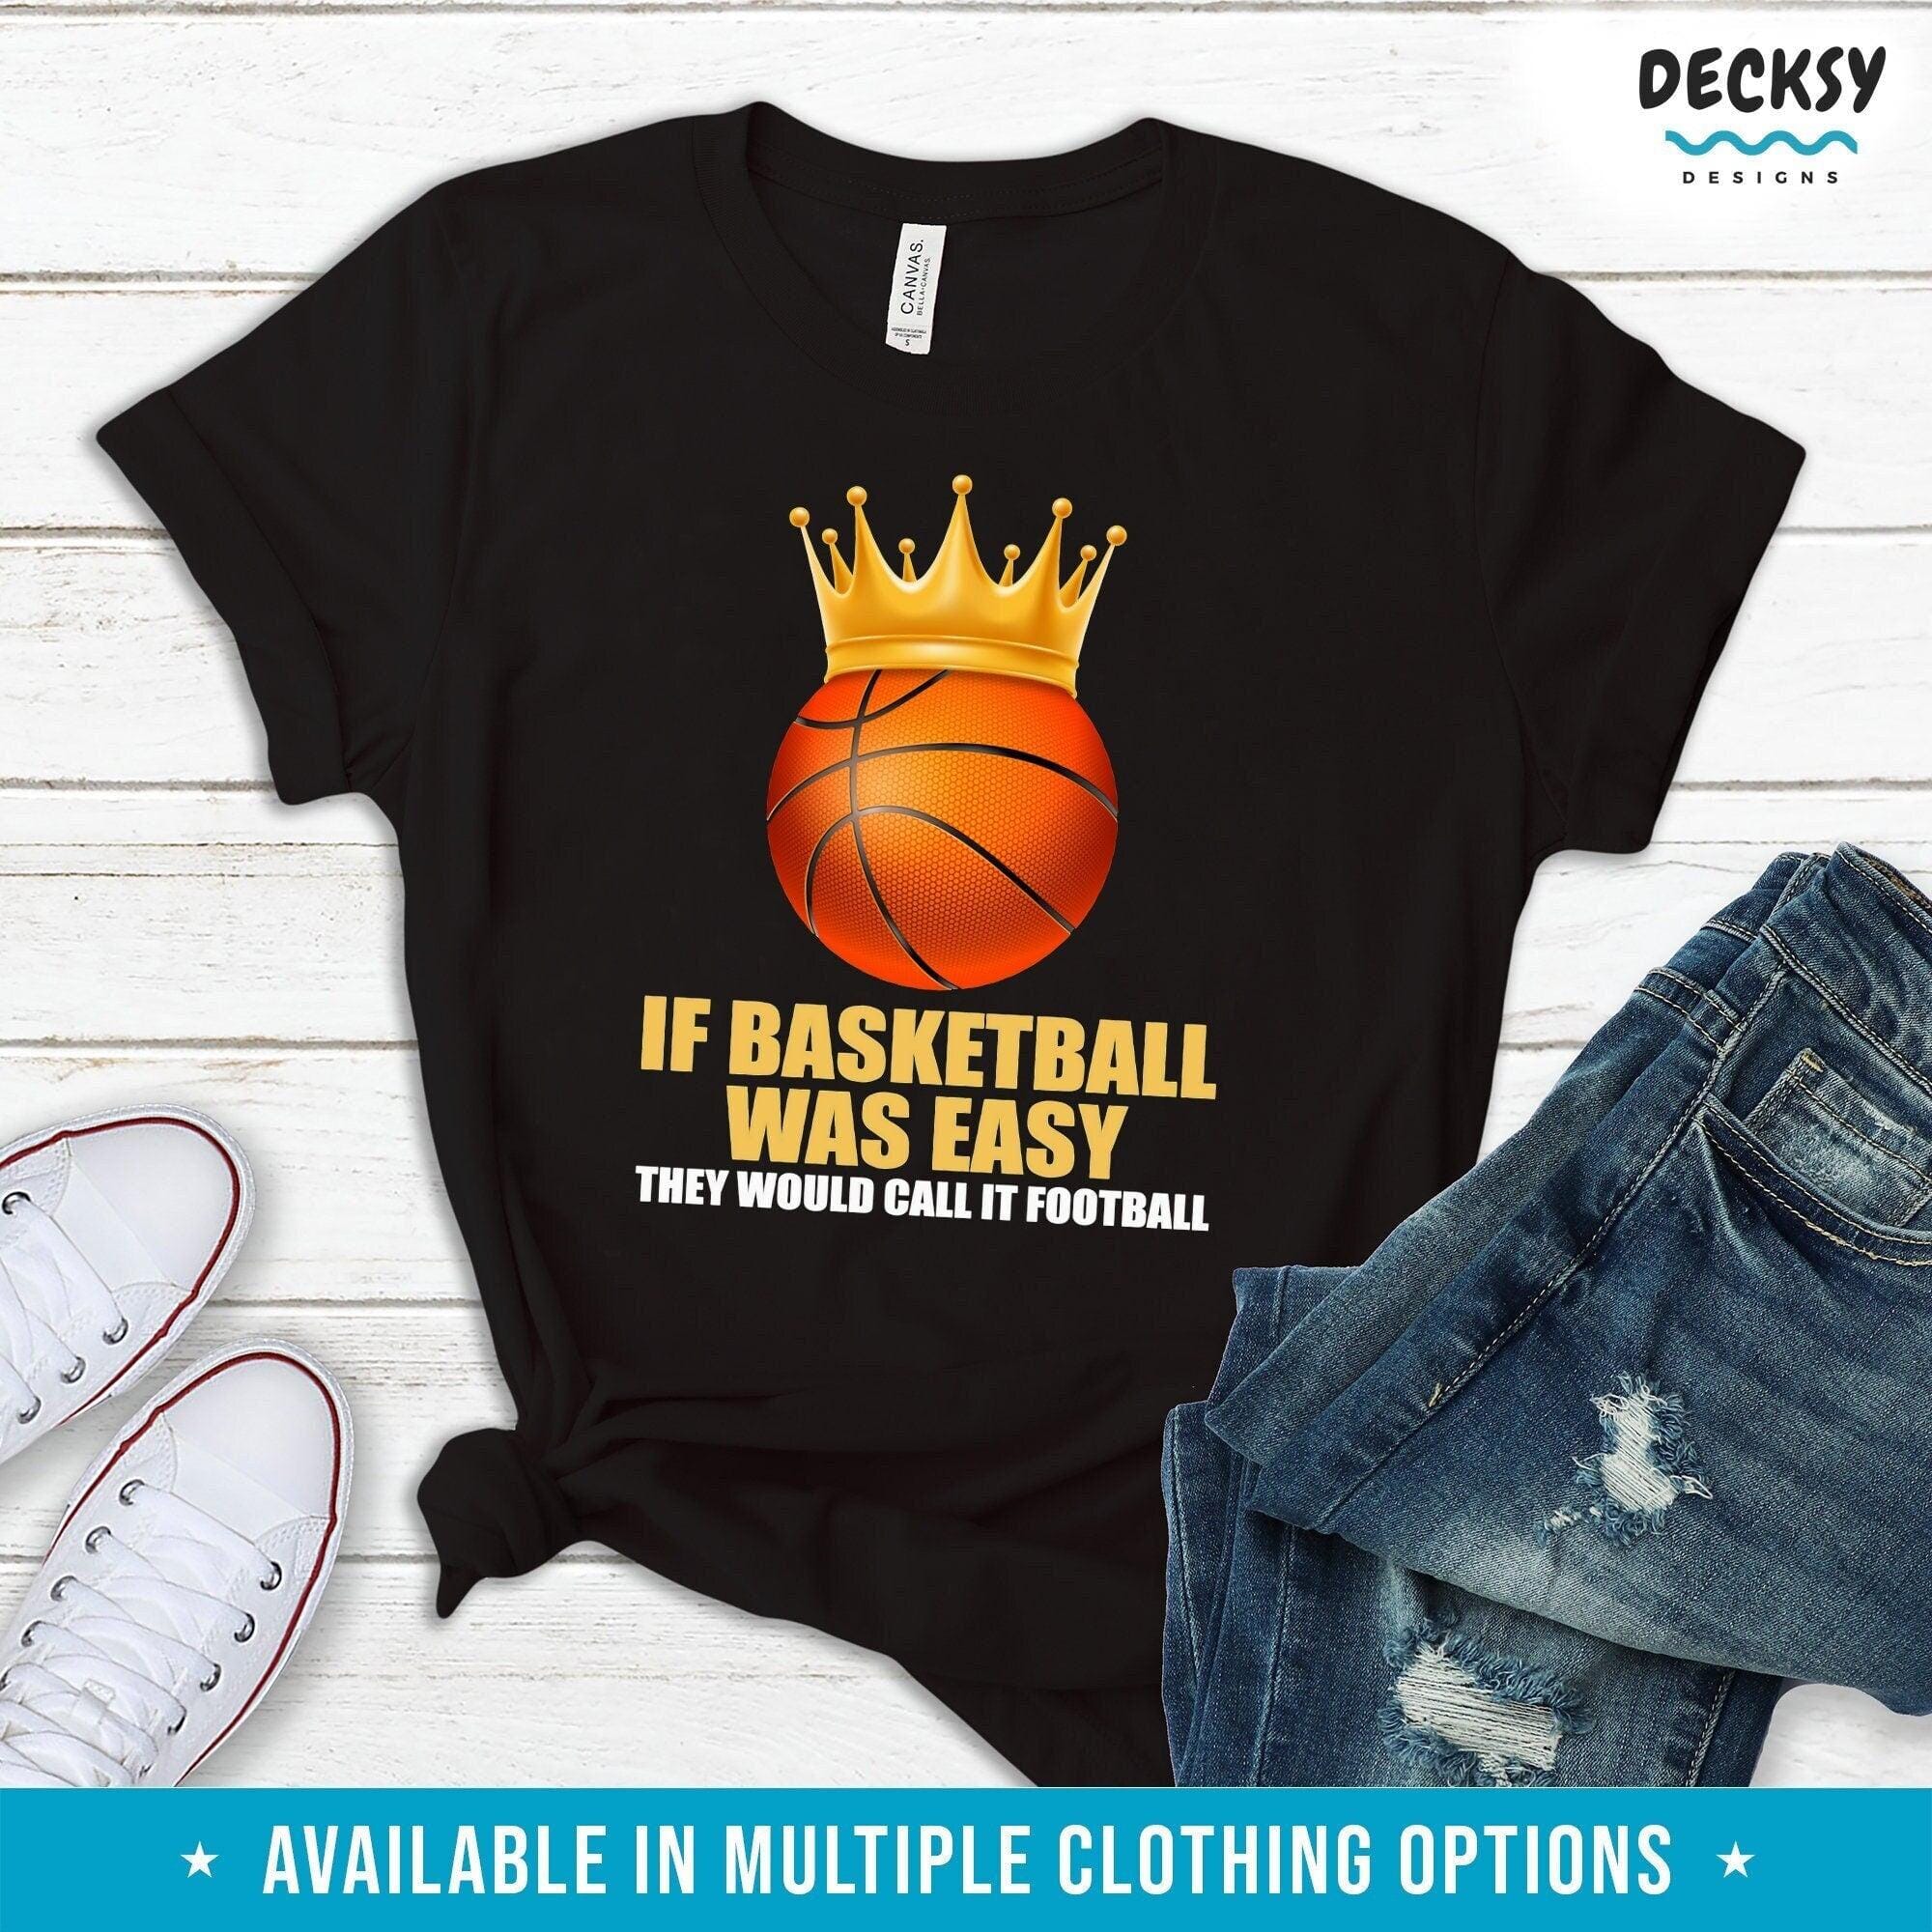 Funny Basketball Tshirt, Gift for Basketball Player-Clothing:Gender-Neutral Adult Clothing:Tops & Tees:T-shirts:Graphic Tees-DecksyDesigns